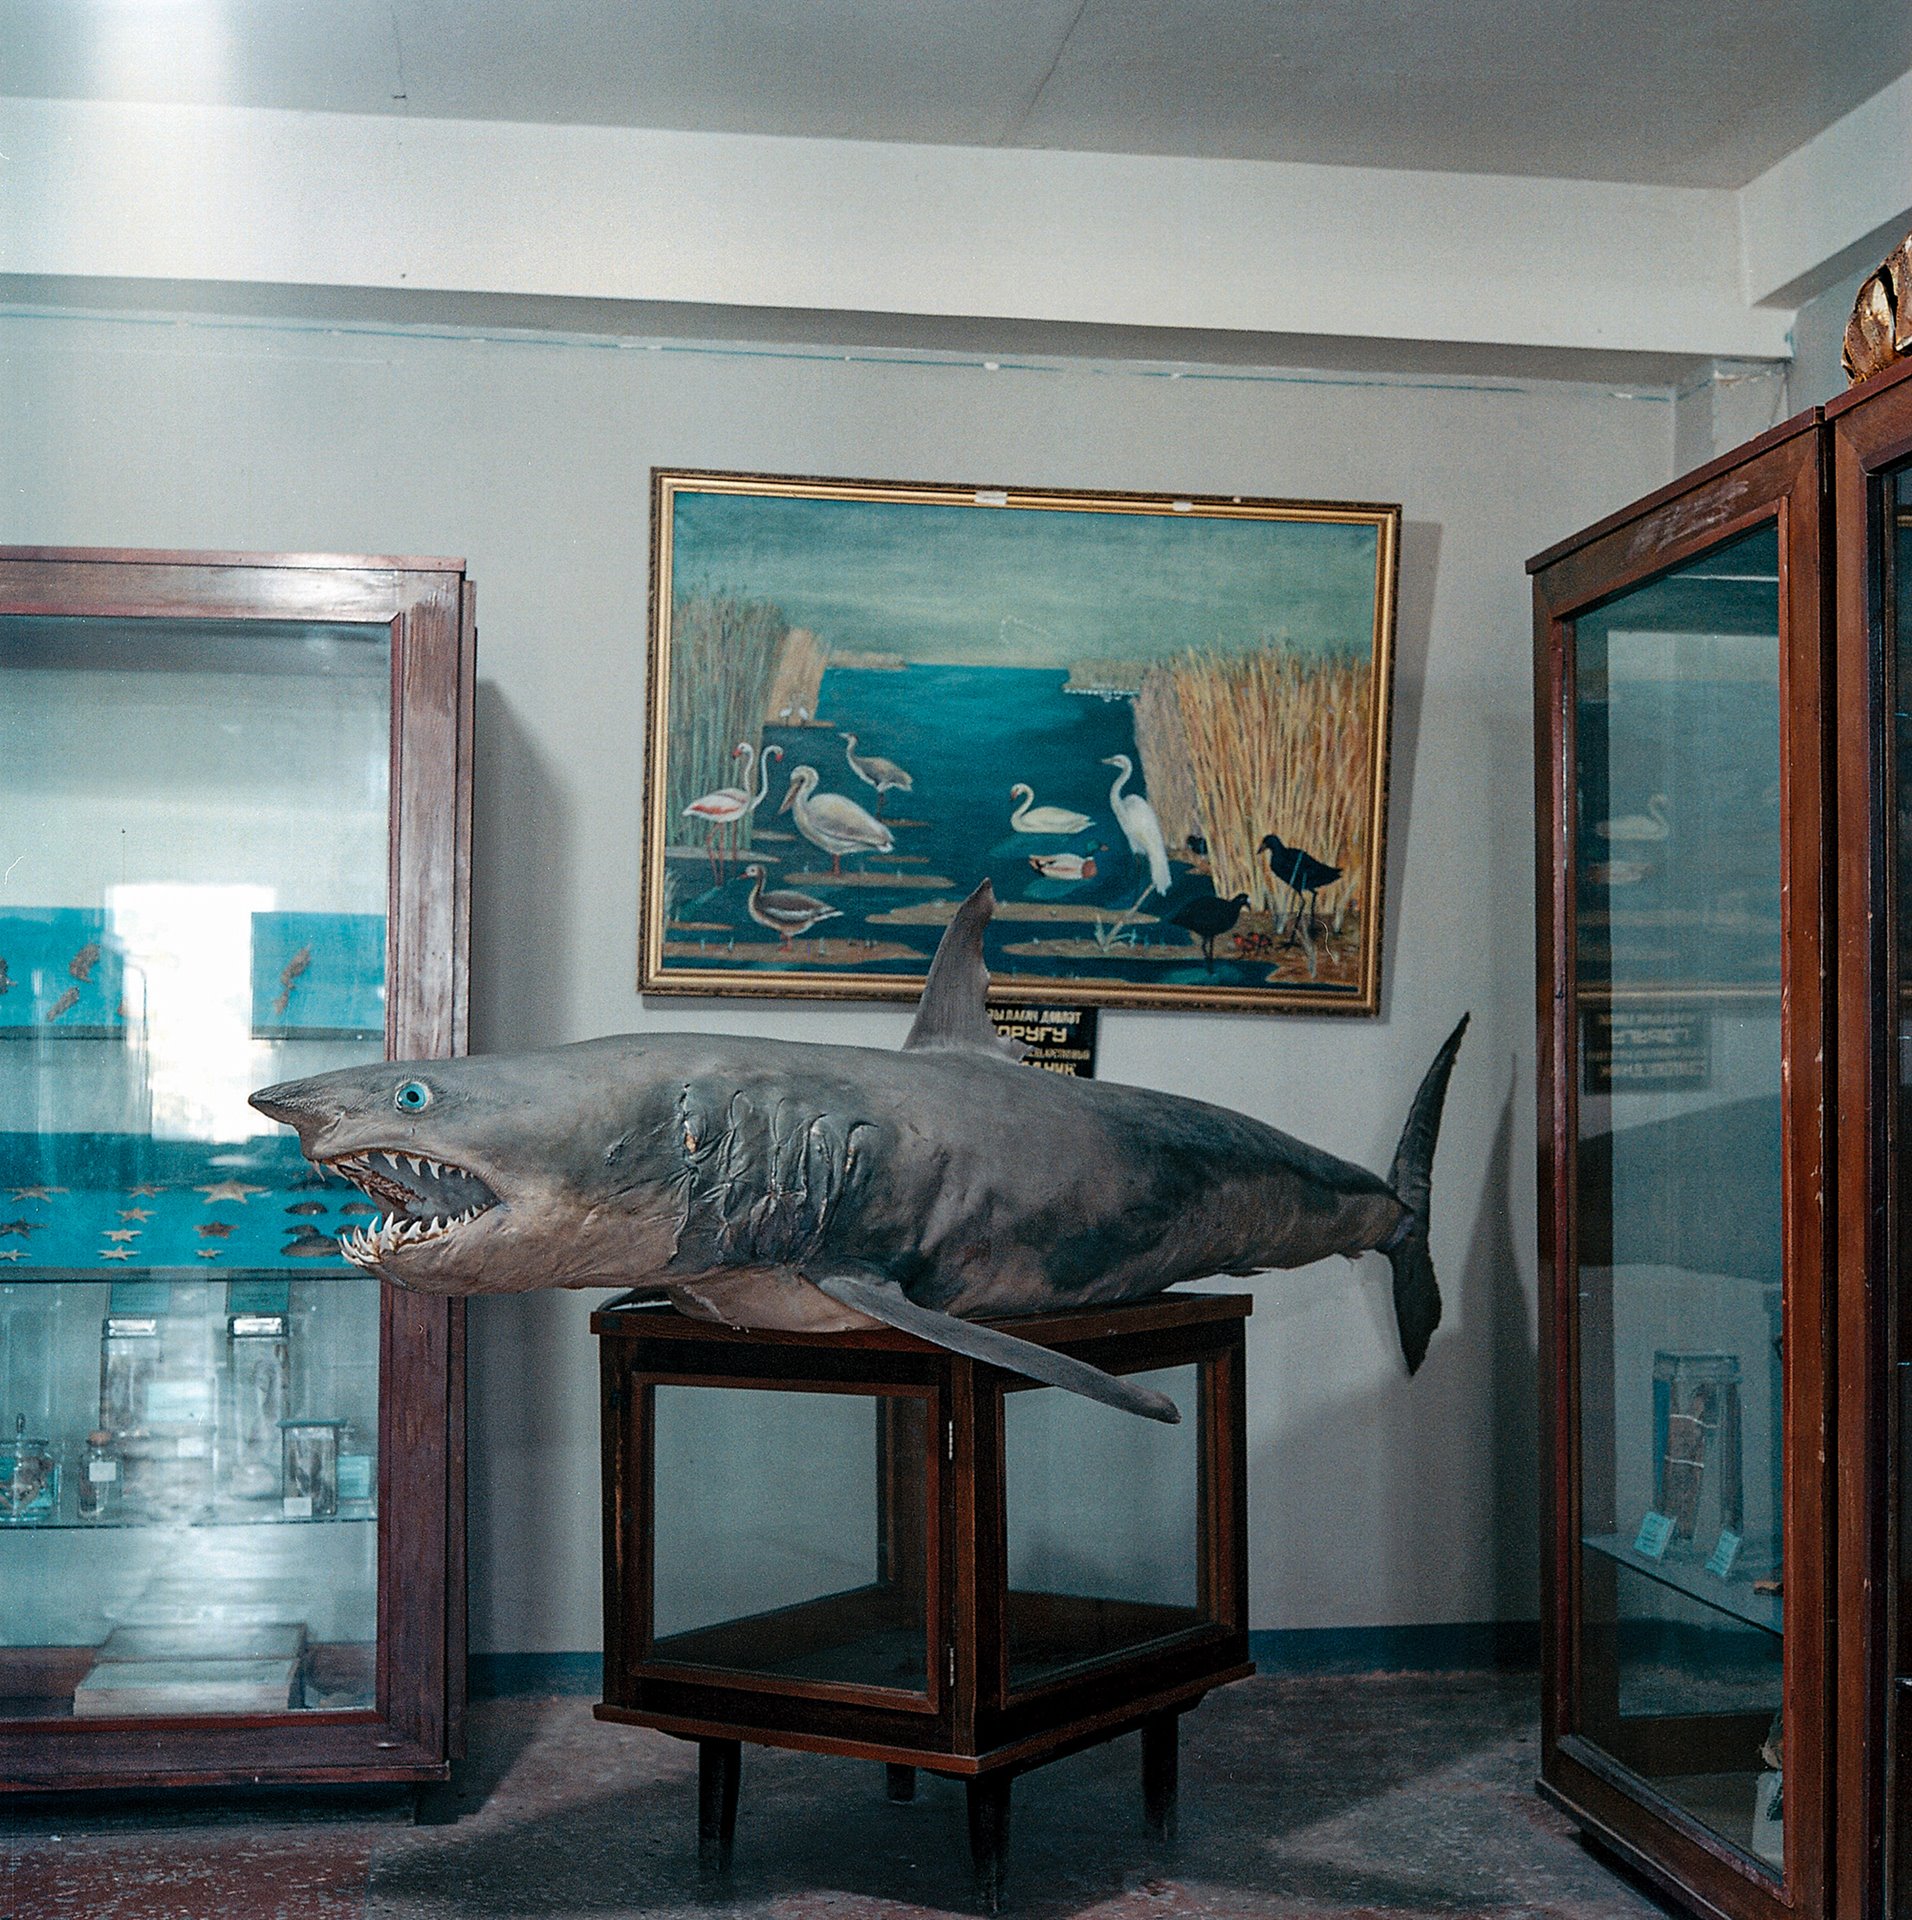 A taxidermied shark at the Azerbaijan State institute of Zoology in Baku, Azerbaijan, where Rustam Effendi worked as an entomologist.